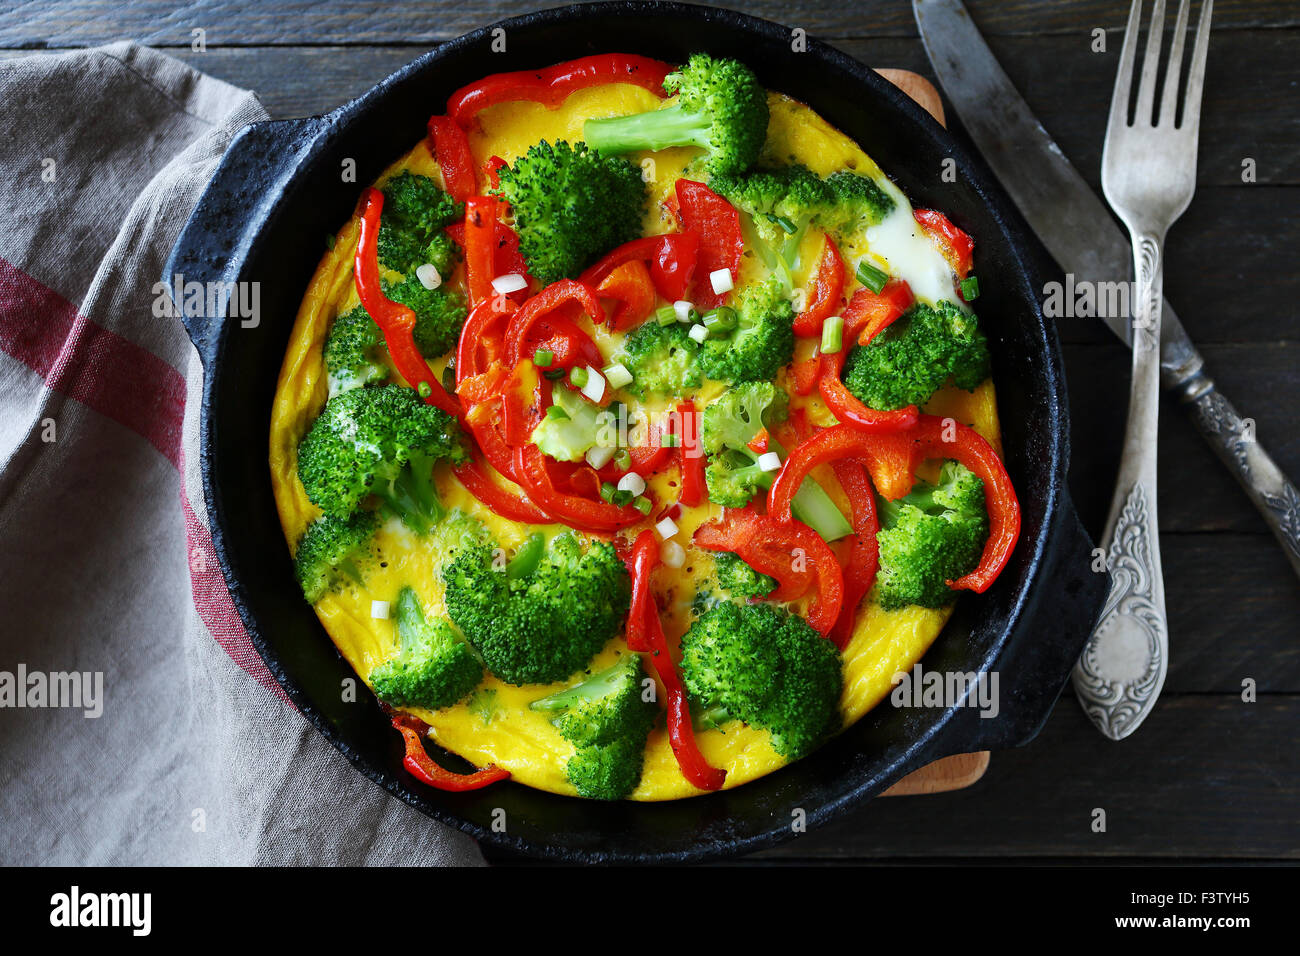 frittata with vegetables, rustic food Stock Photo